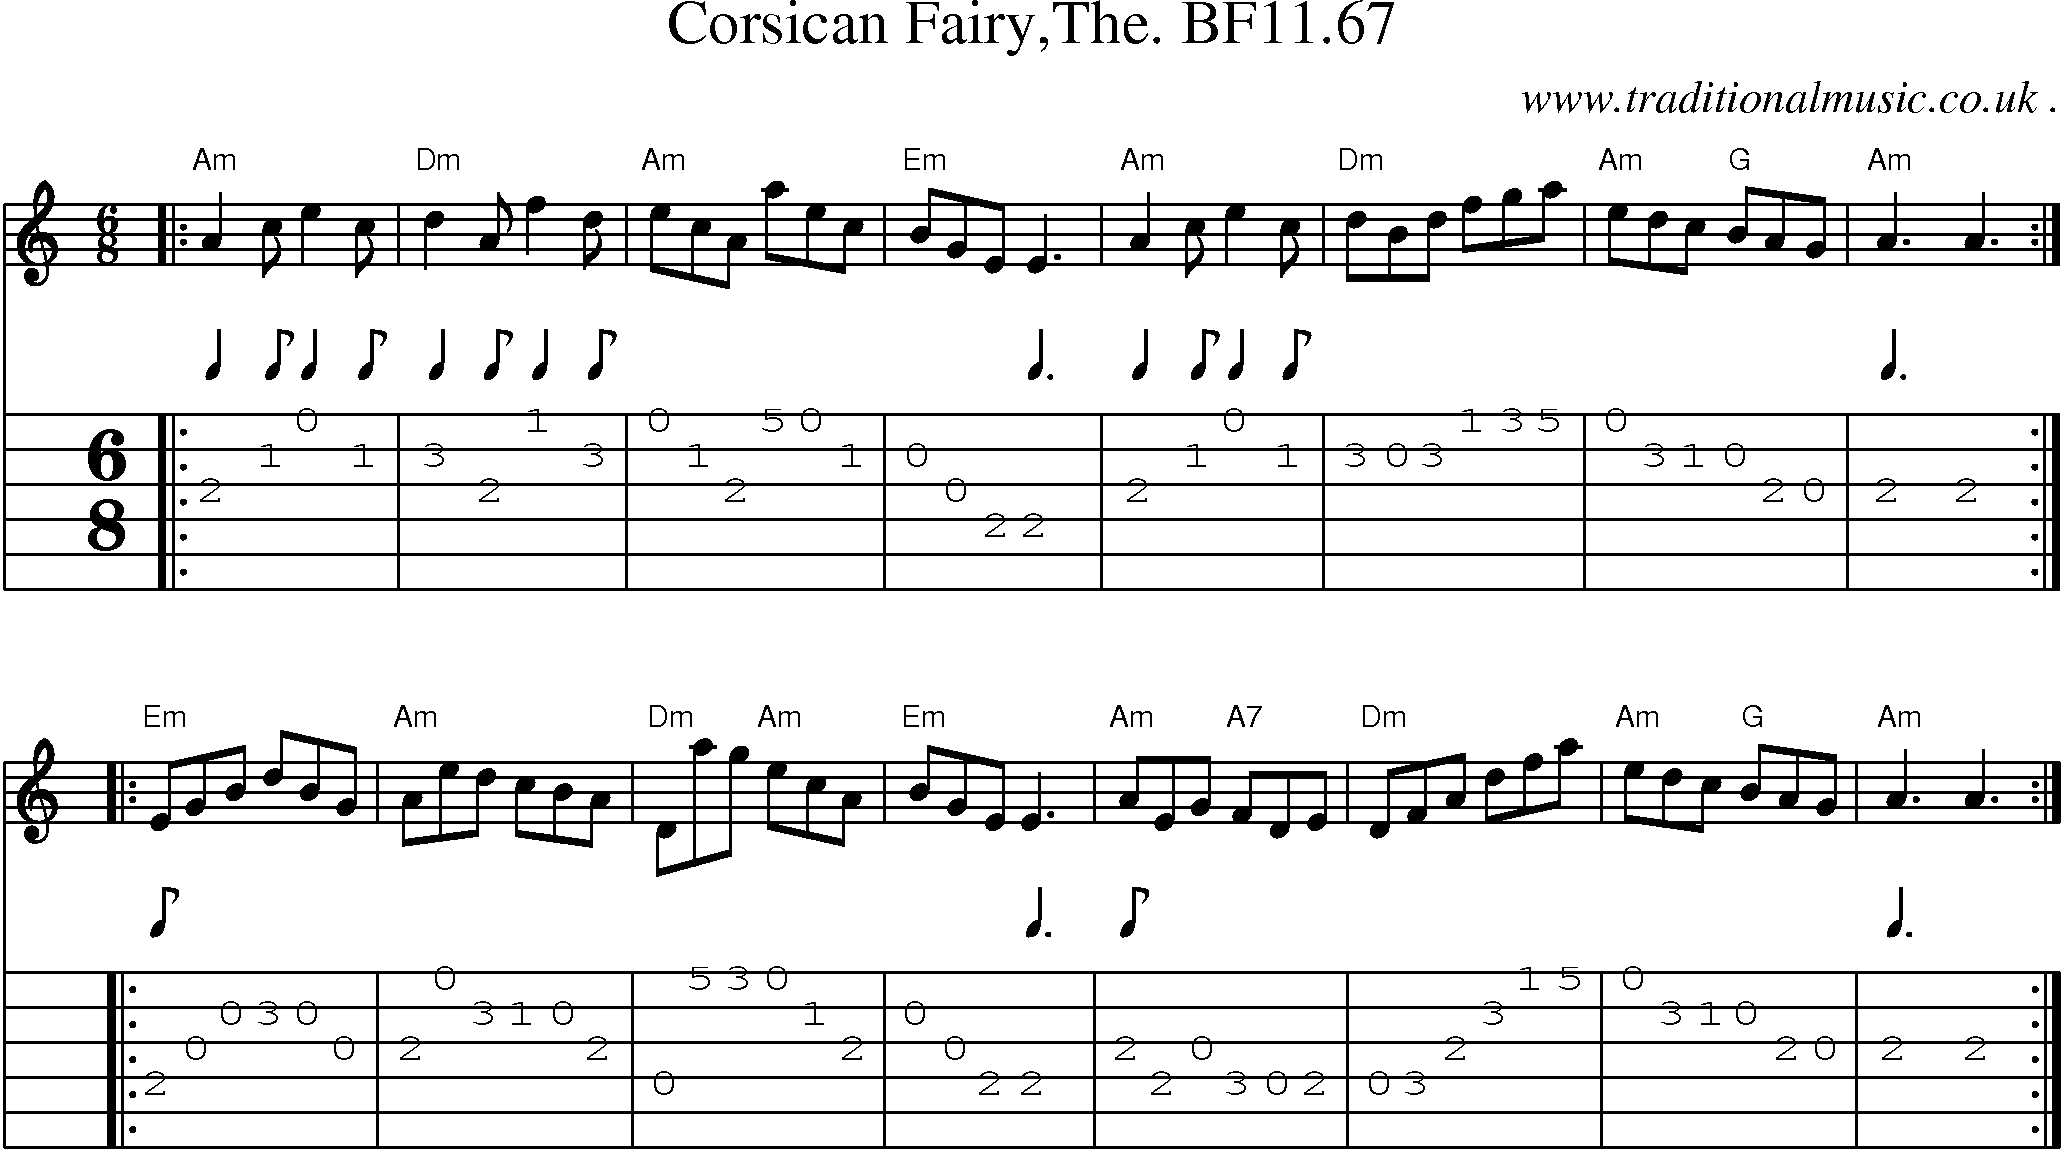 Sheet-music  score, Chords and Guitar Tabs for Corsican Fairythe Bf1167